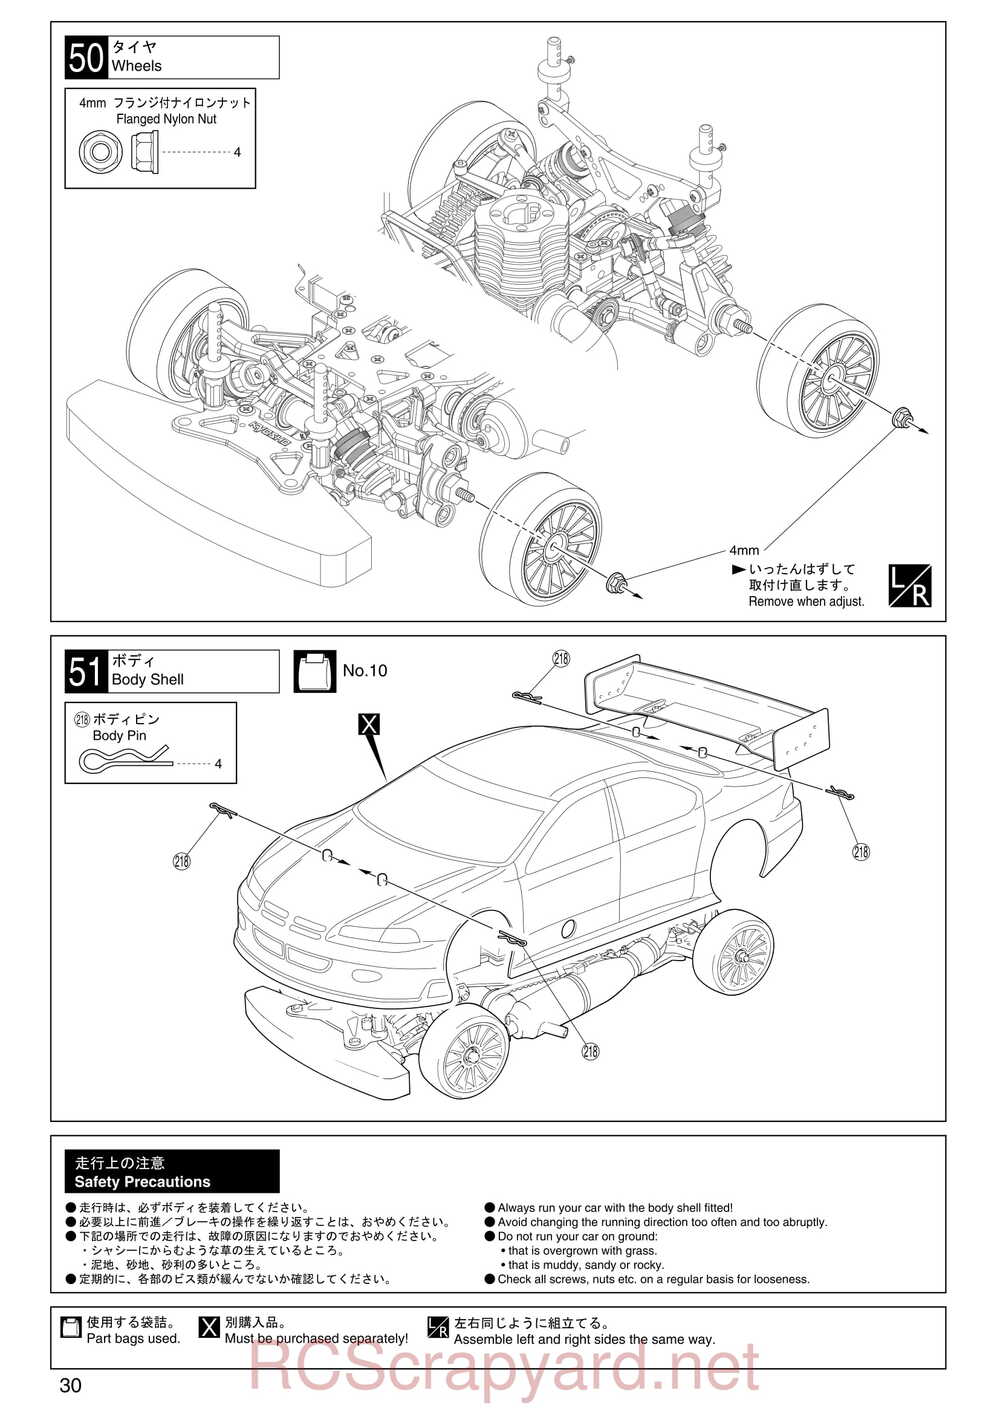 Kyosho - 31257 - V-One RRR Rubber - Manual - Page 30